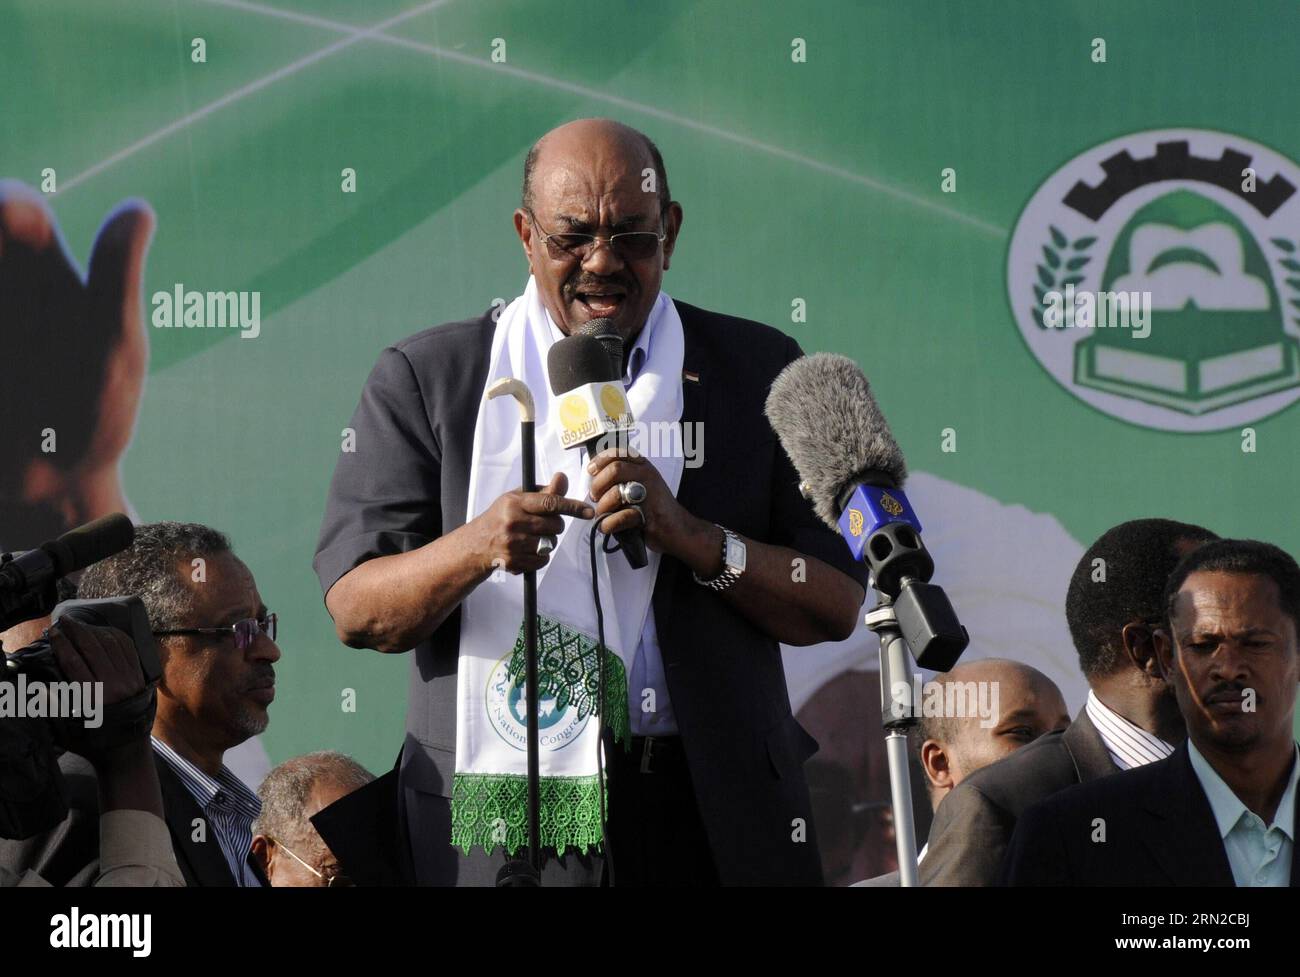 Sudanese President Omar al-Bashir addresses his supporters during an electoral campaign in Medani city, Sudan, on Feb. 26, 2015. Sudanese President Omar al-Bashir on Thursday said he would not quit power until the Sudanese people ask him to leave by not voting for him in the upcoming elections. Al-Bashir, candidate of the ruling National Congress Party (NCP), on Thursday launched his electoral campaign from Medani in Gezira State, running for his third term of office. ) SUDAN-KHARTOUM-PRESIDENT-CAMPAIGN HohammedxBabiker PUBLICATIONxNOTxINxCHN   Sudanese President Omar Al Bashir addresses His S Stock Photo